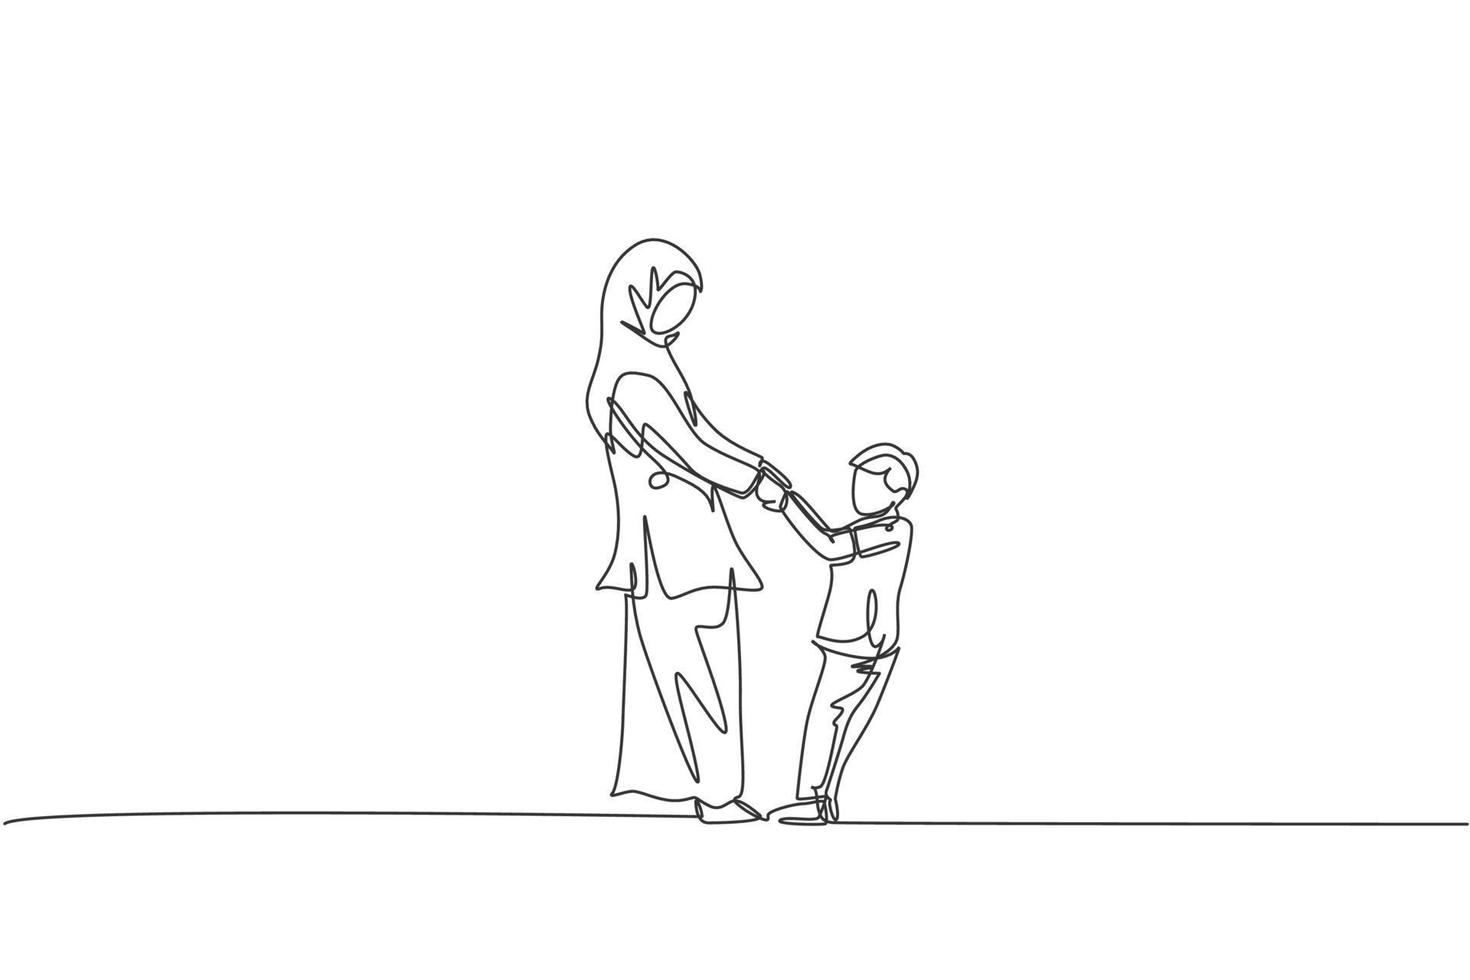 Single one line drawing of young Arabian mom and son playing and holding together at home vector illustration. Happy Islamic muslim family parenting concept. Modern continuous line graphic draw design